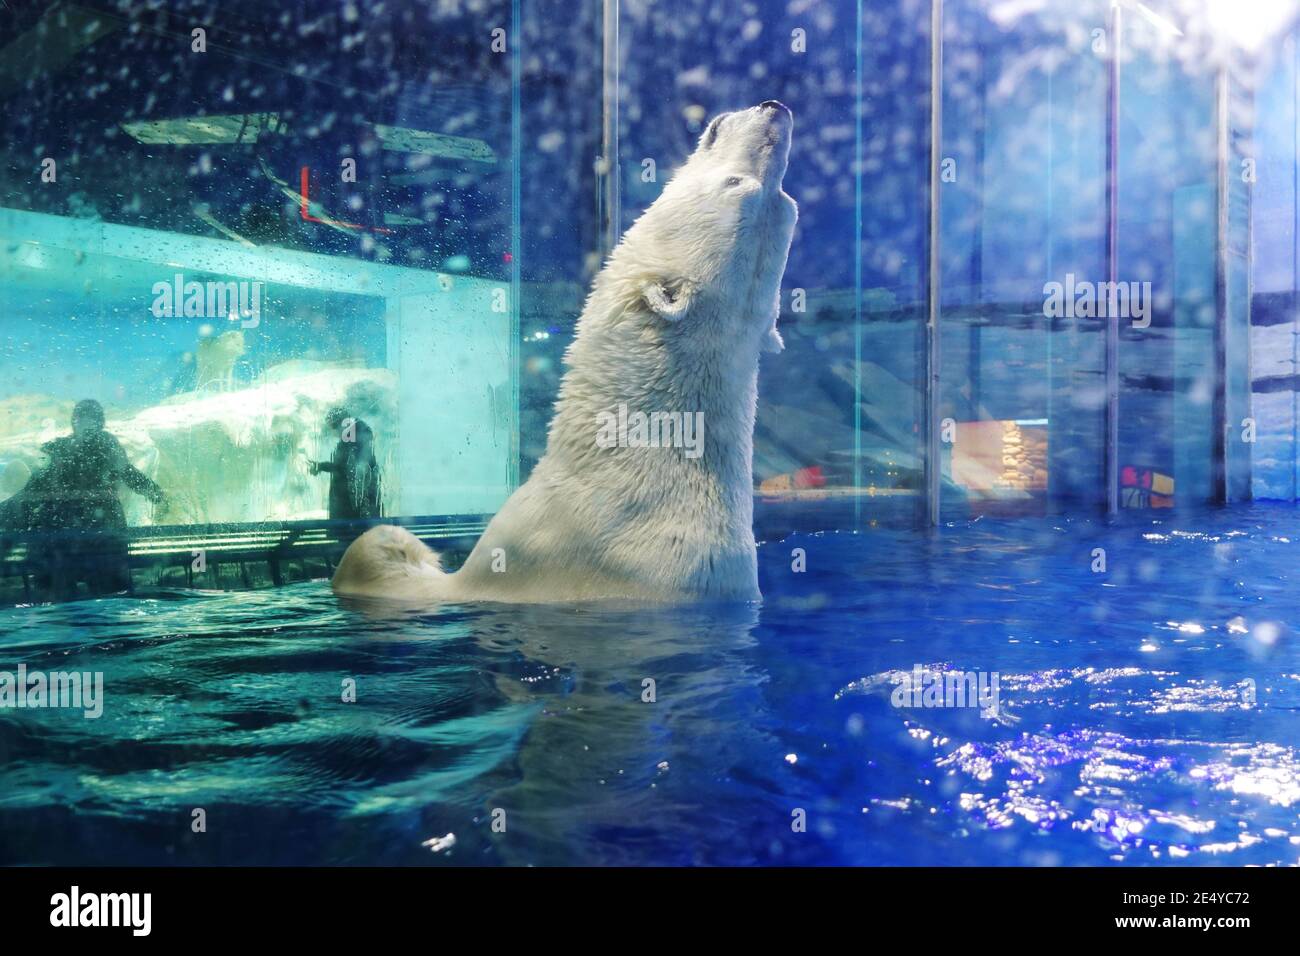 Harbin Polar Pavilion, the world's first polar performing arts amusement  park, features the most comprehensive range of Arctic and Antarctic animals  and polar animal shows, atracting many tourists to visit in Harbin